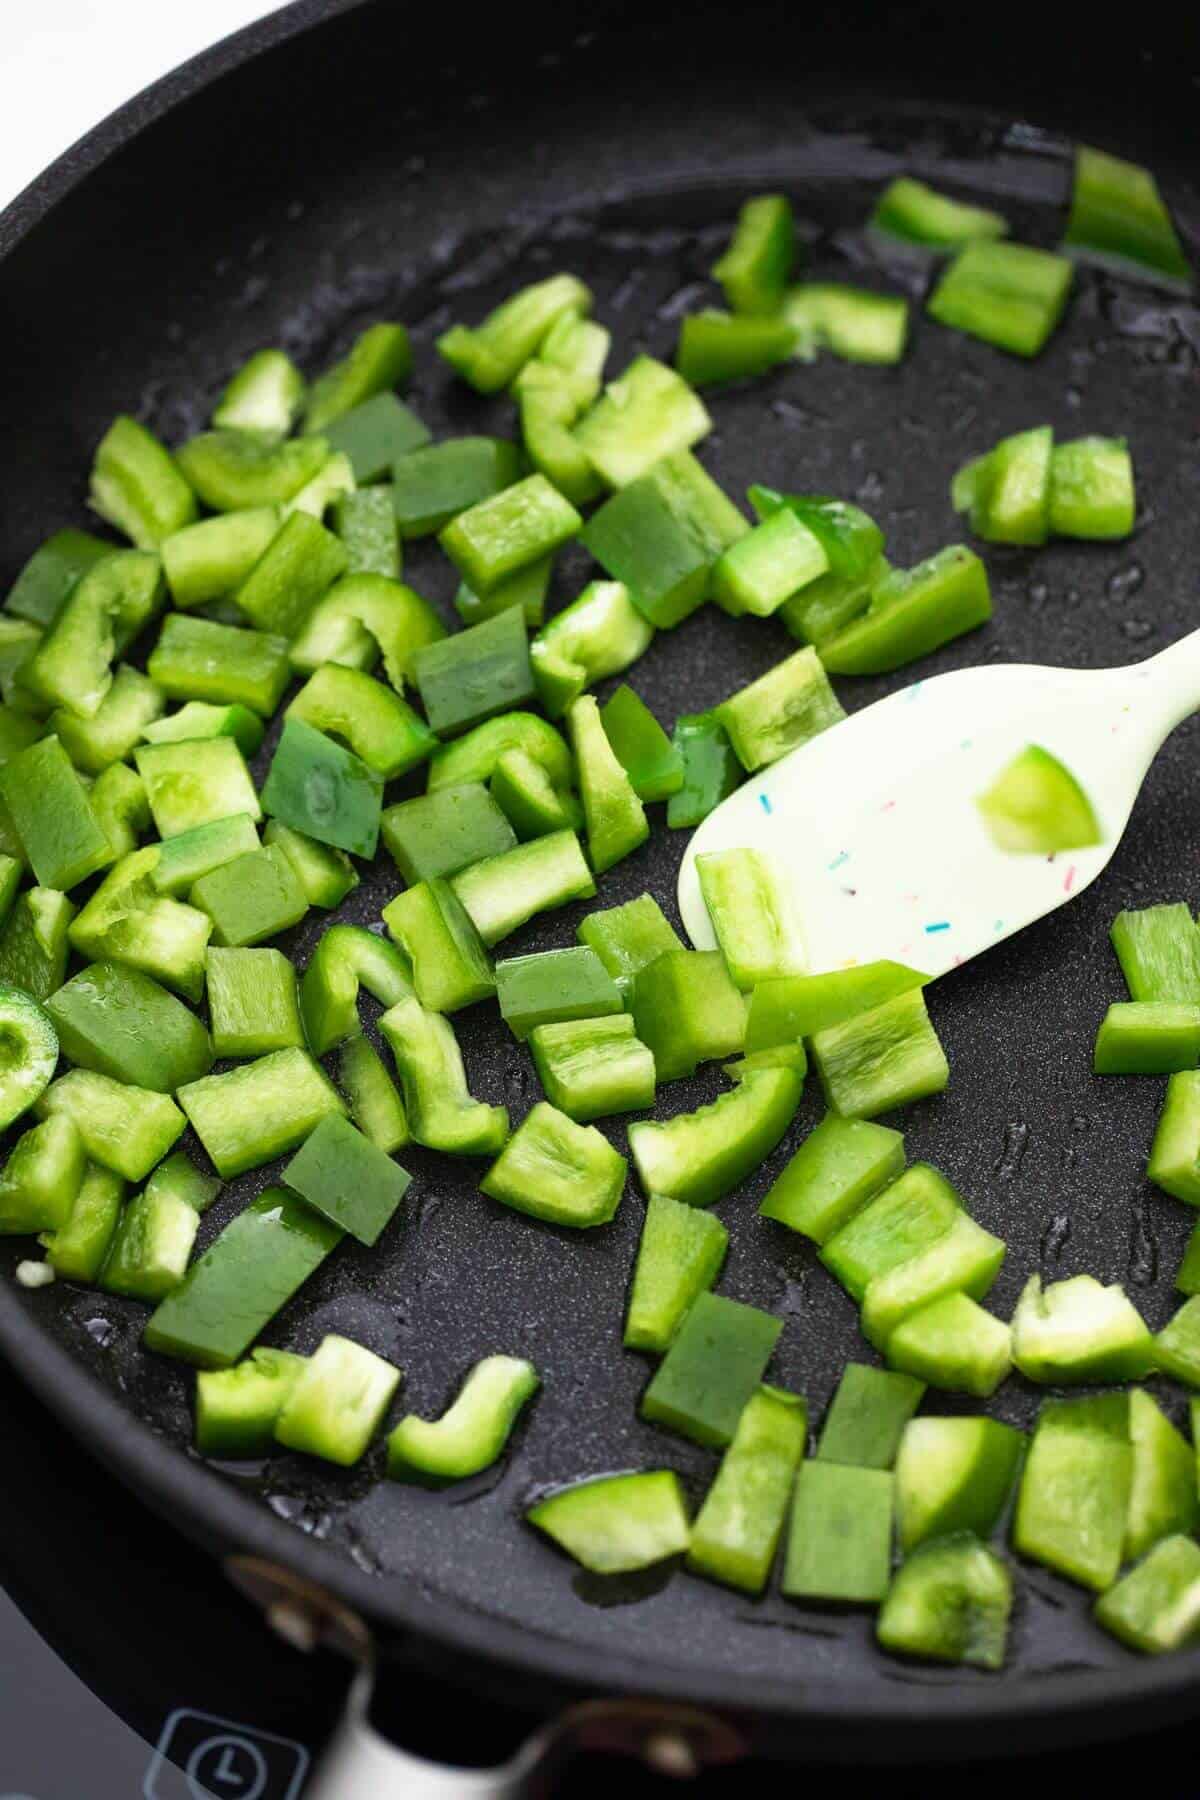 Chopped green pepper in a frying pan with a spoon.